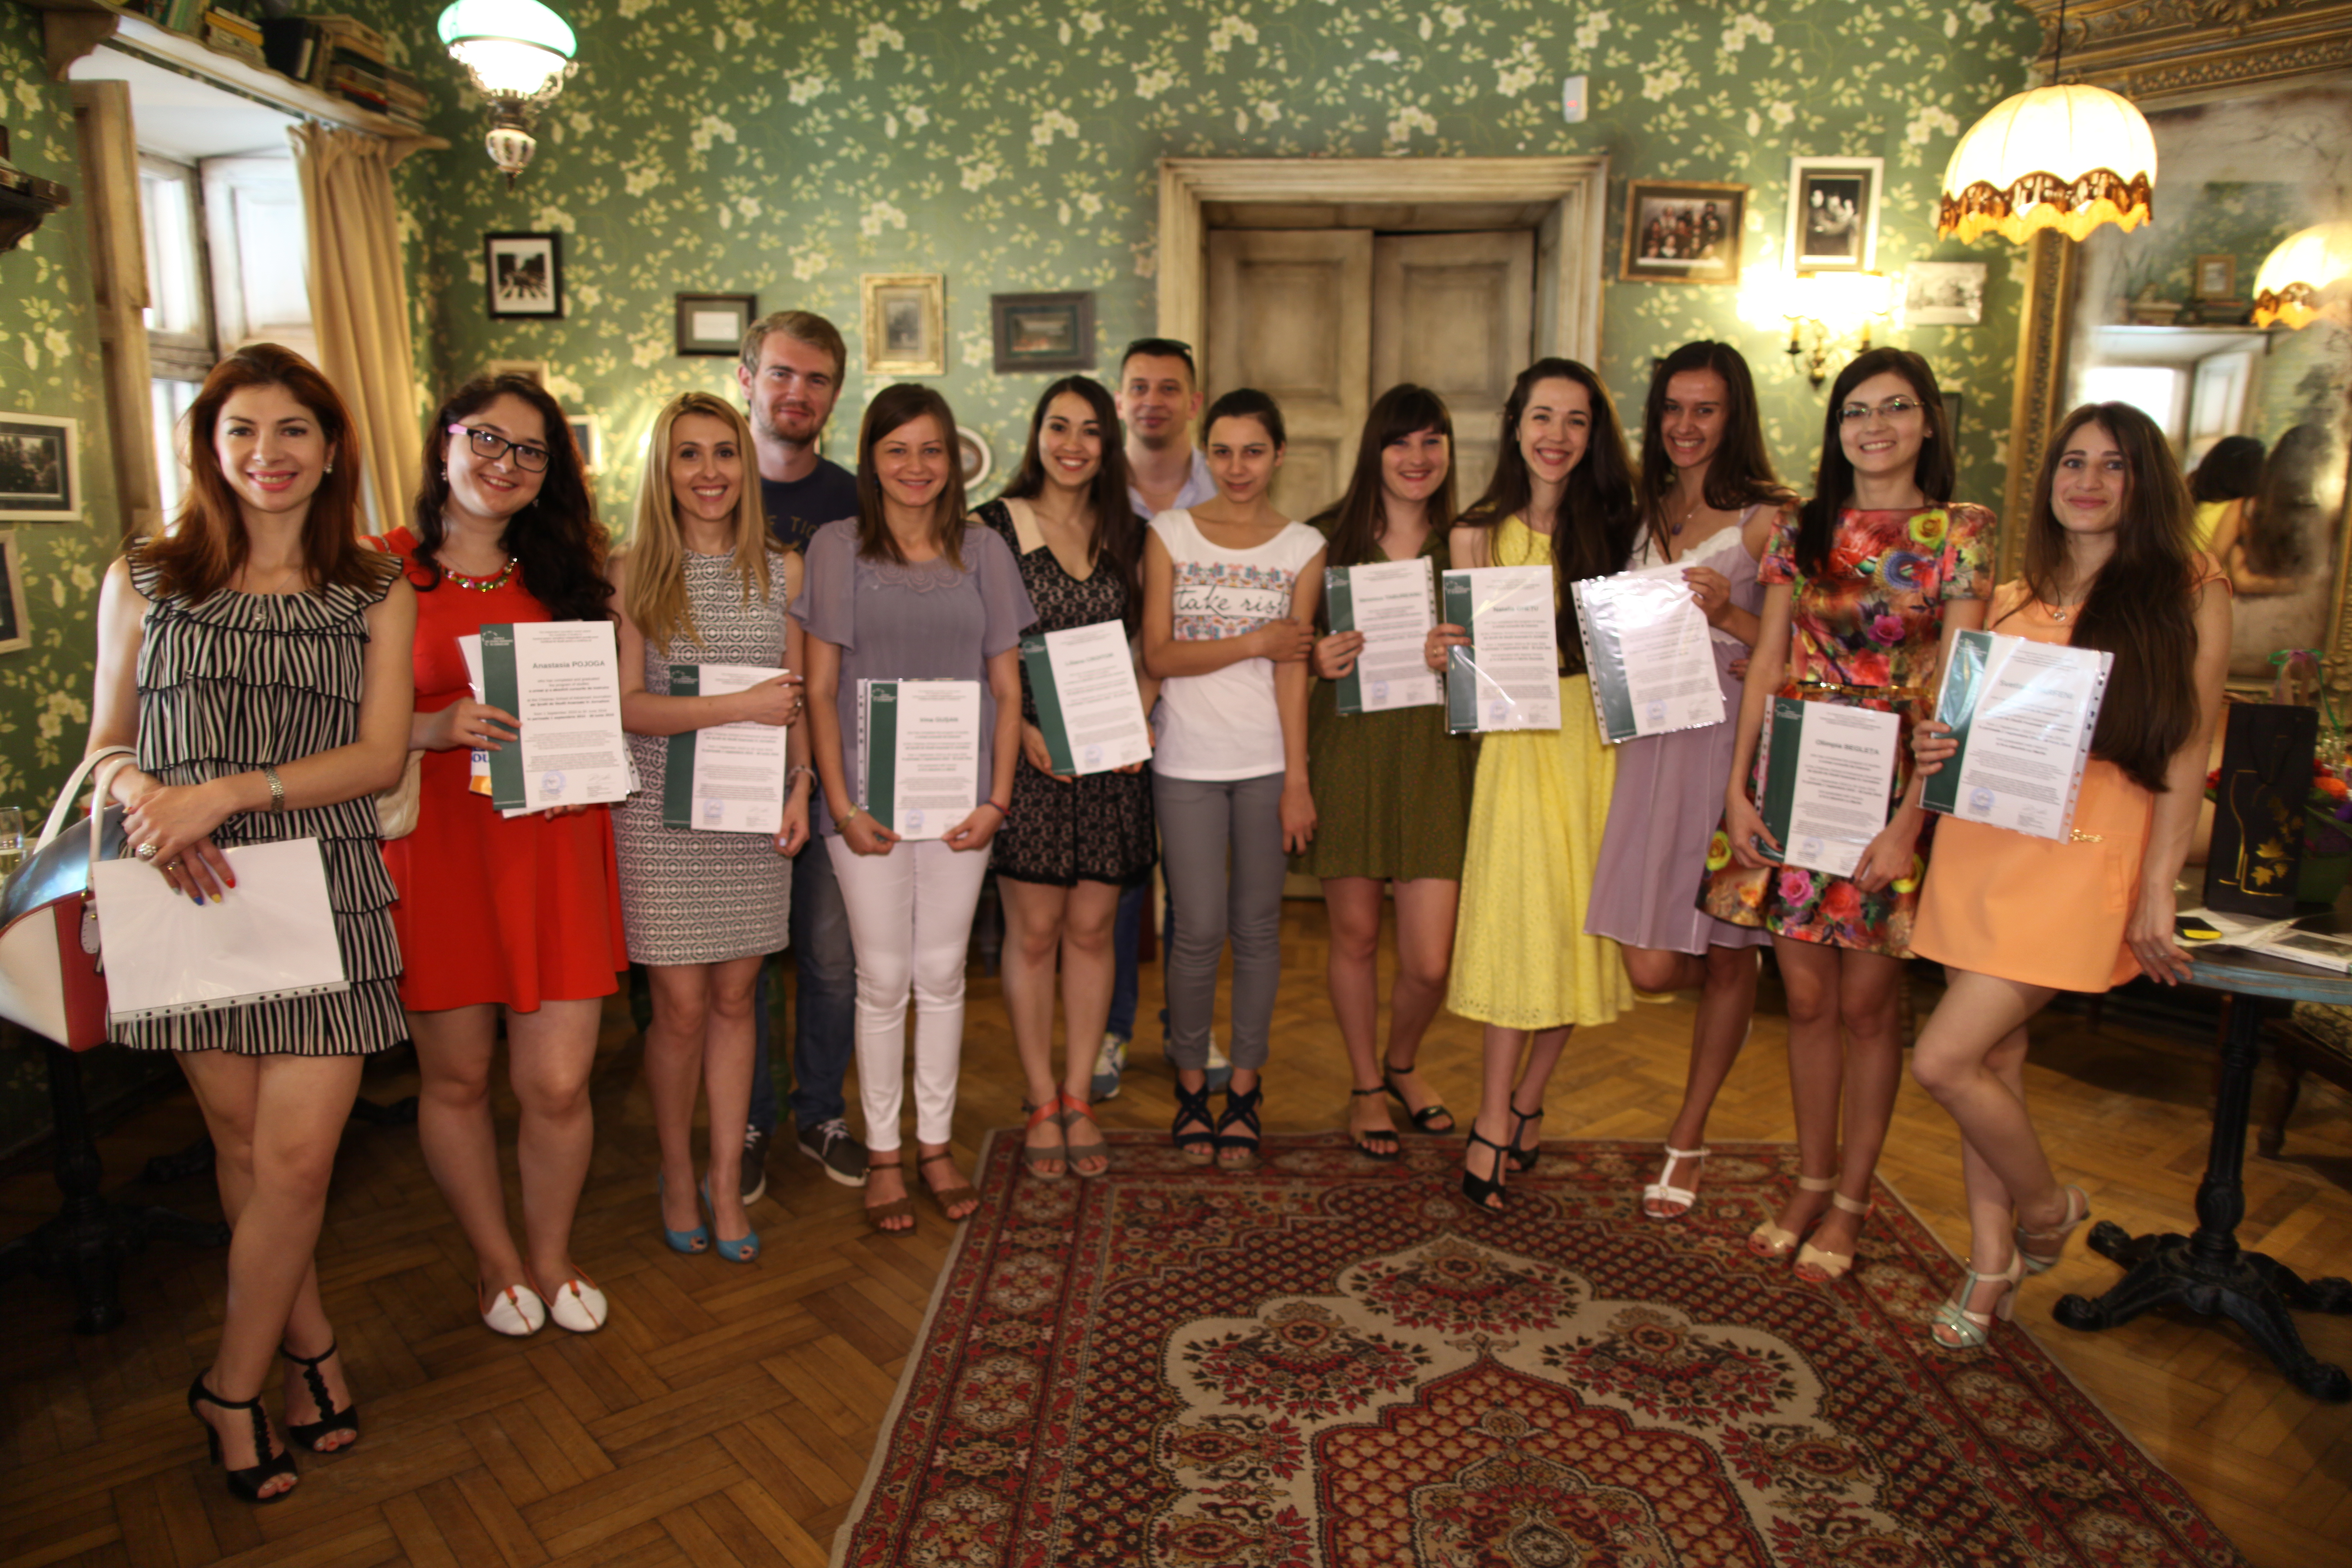 The students of the TENTH graduating class of the SAJ received their certificates of study